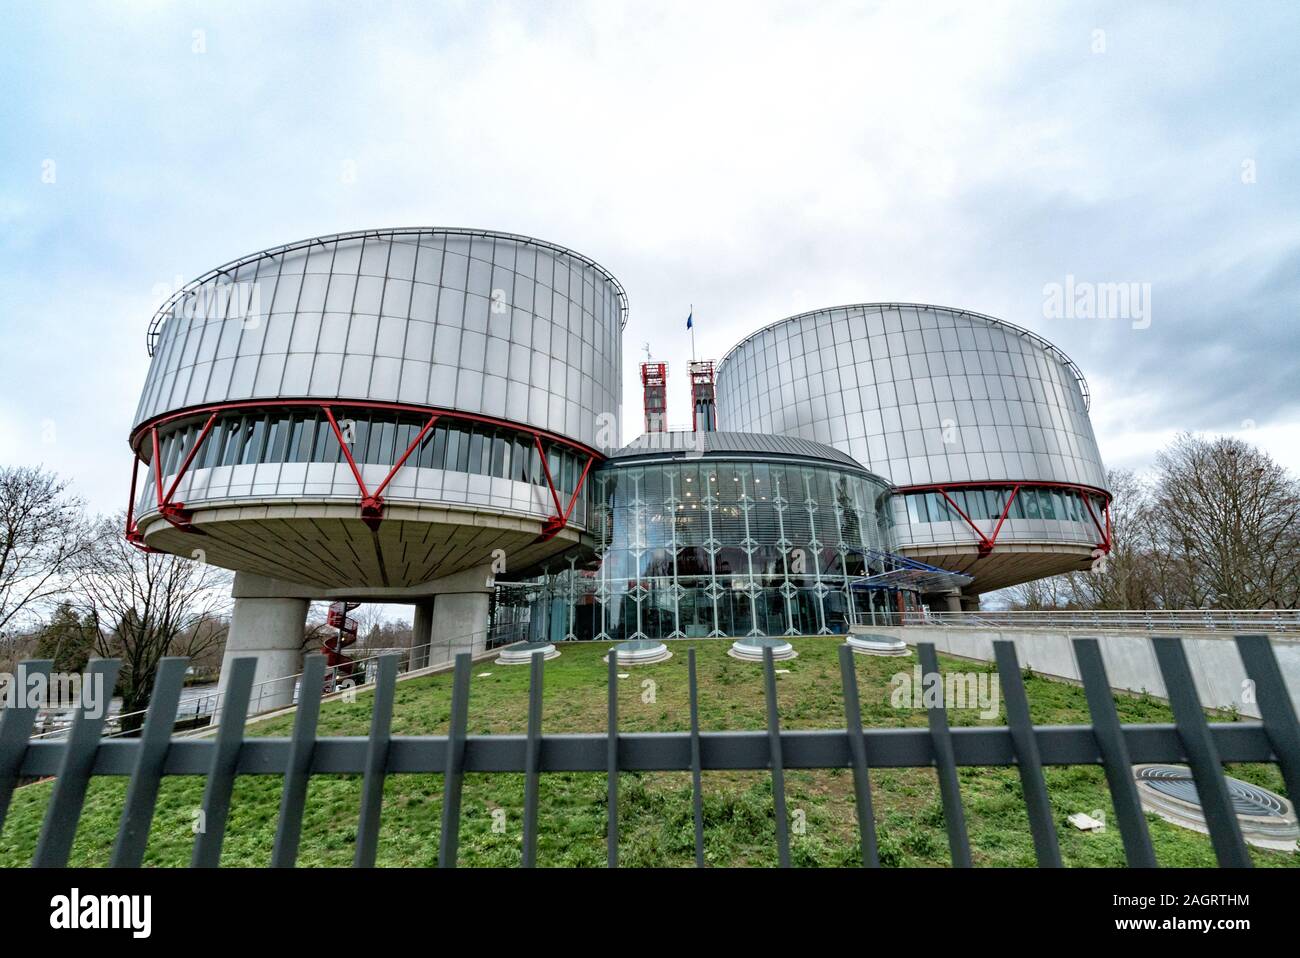 Strasbourg, Bas-Rhin / France - 14. December, 2019: view of the European Court of Human Rights building in Strasbourg Stock Photo